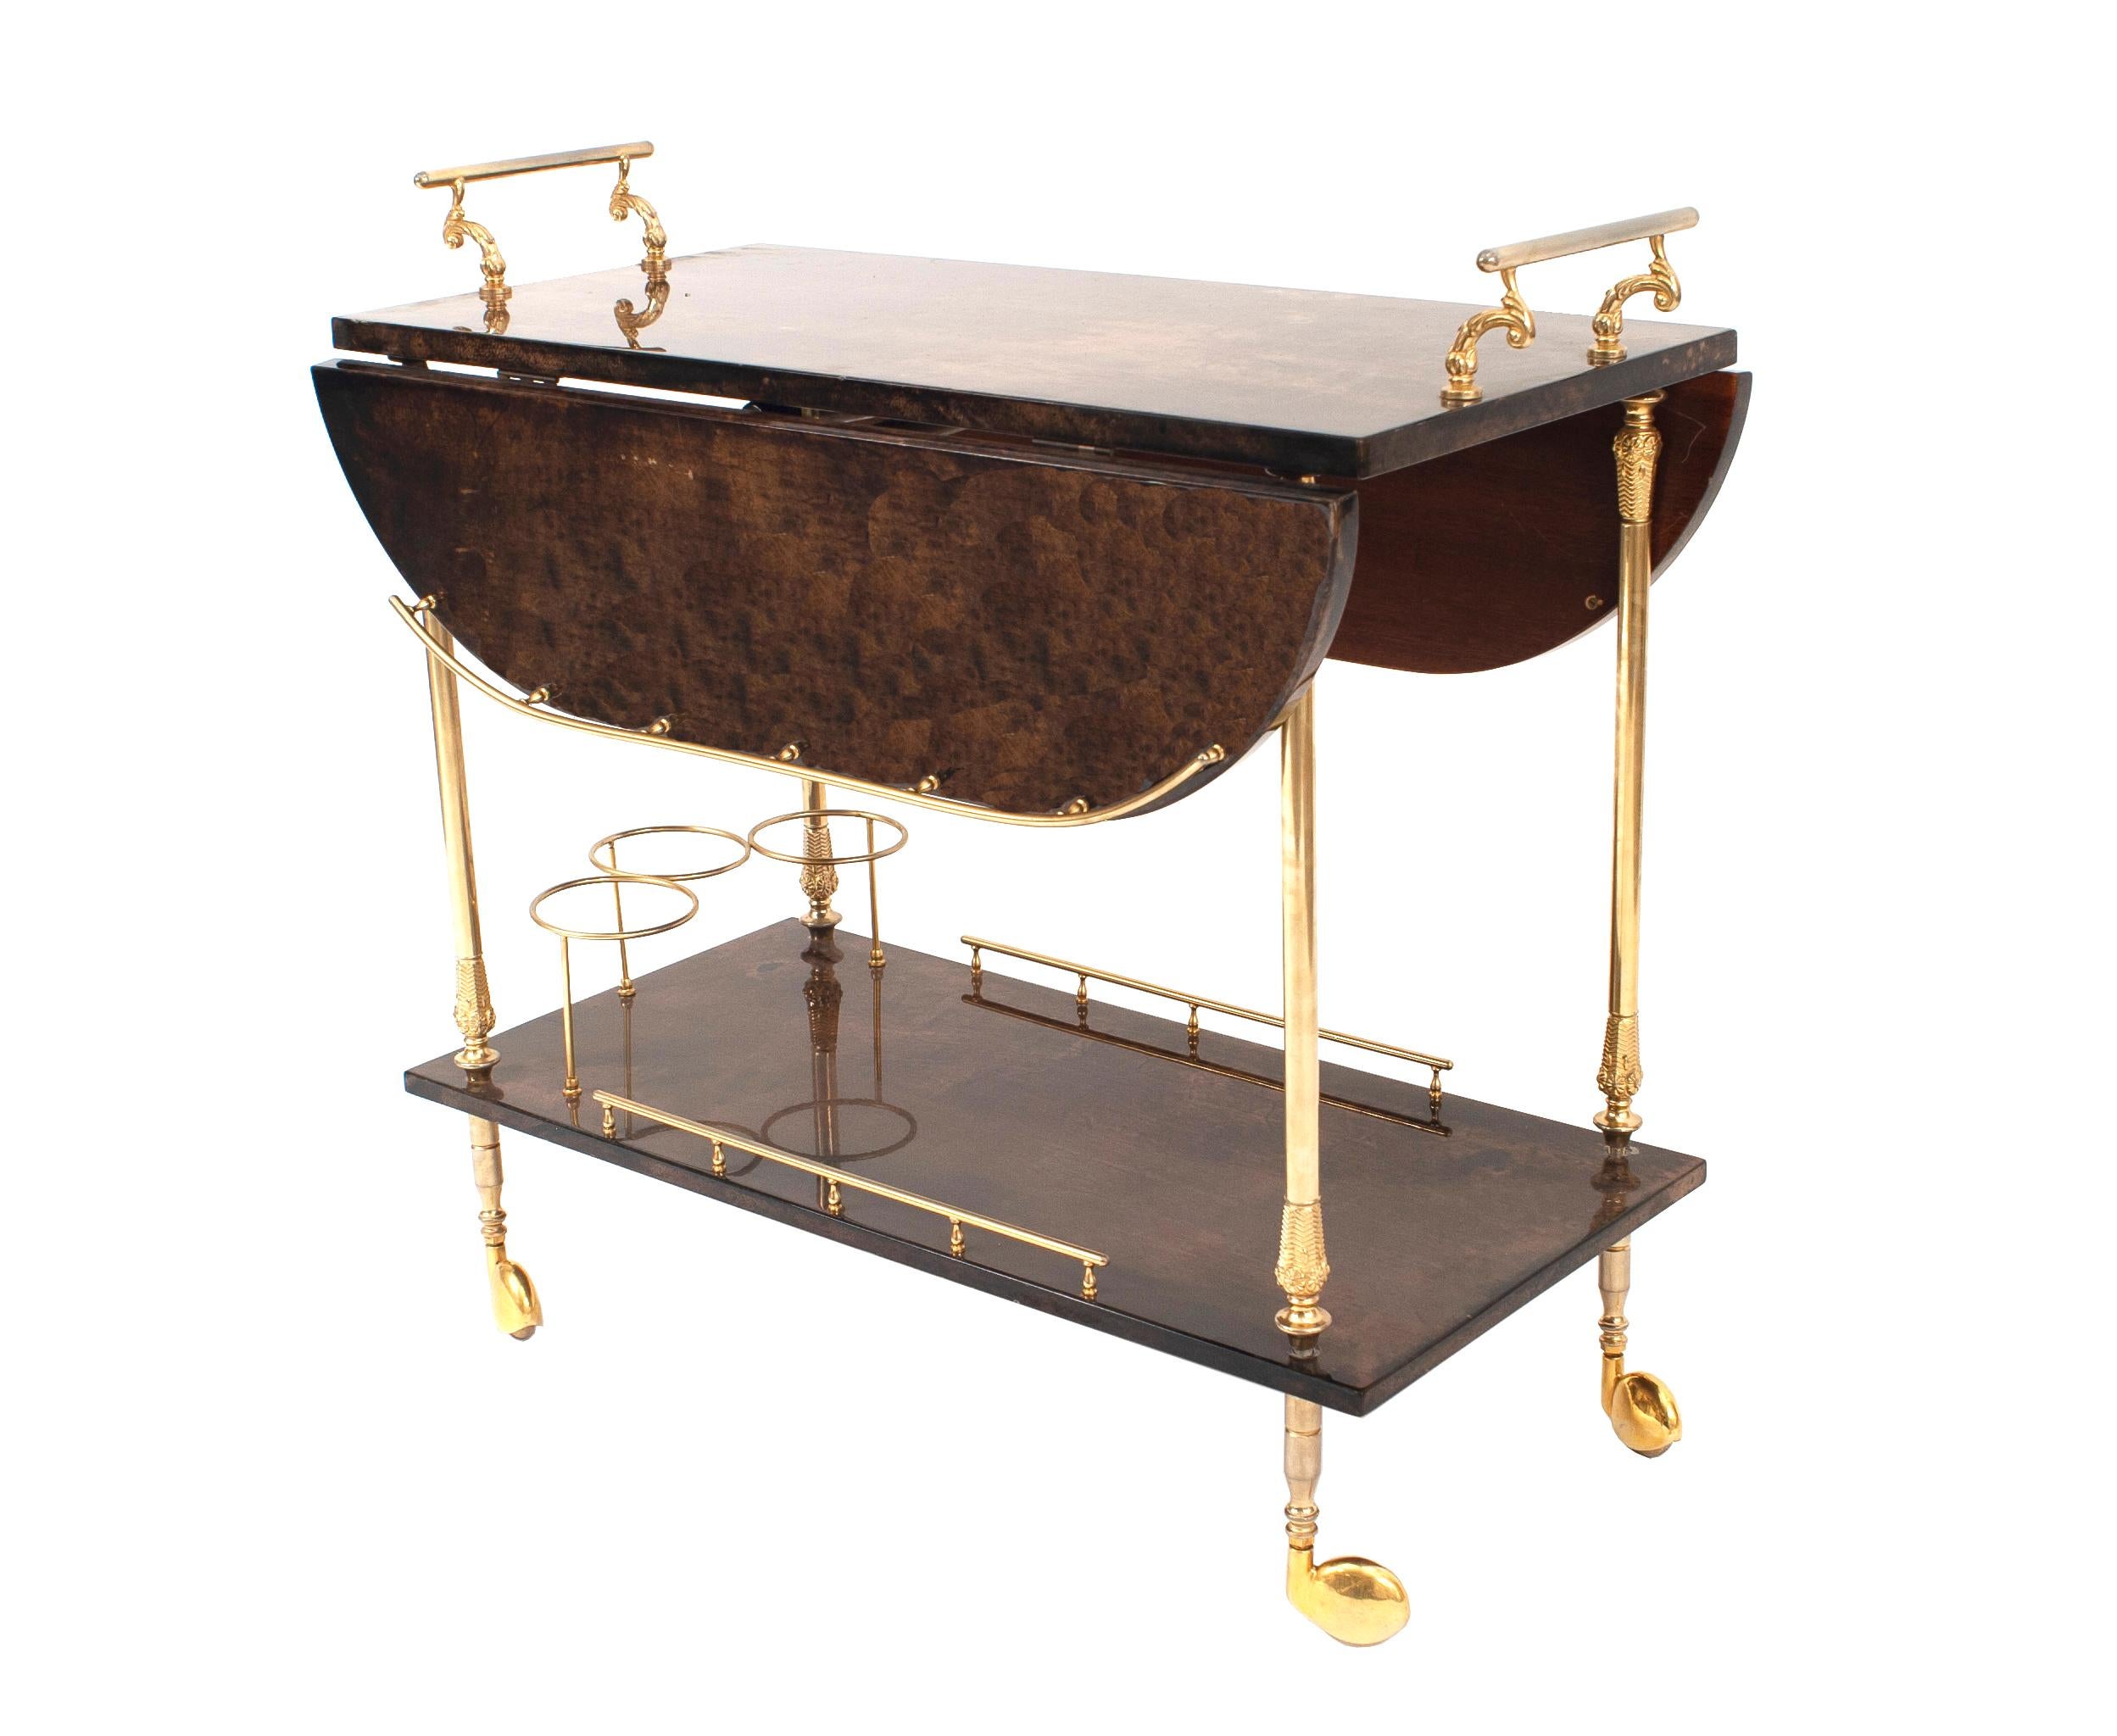 Italian midcentury brown lacquered goatskin 2-tier bar / tea cart with two collapsible side leaves, 2 gold metal handles, rails, 3 bottle rack on 4 castors. (by Aldo Turo).

Aldo Tura was an Italian artist-craftsman who started to manufacture and